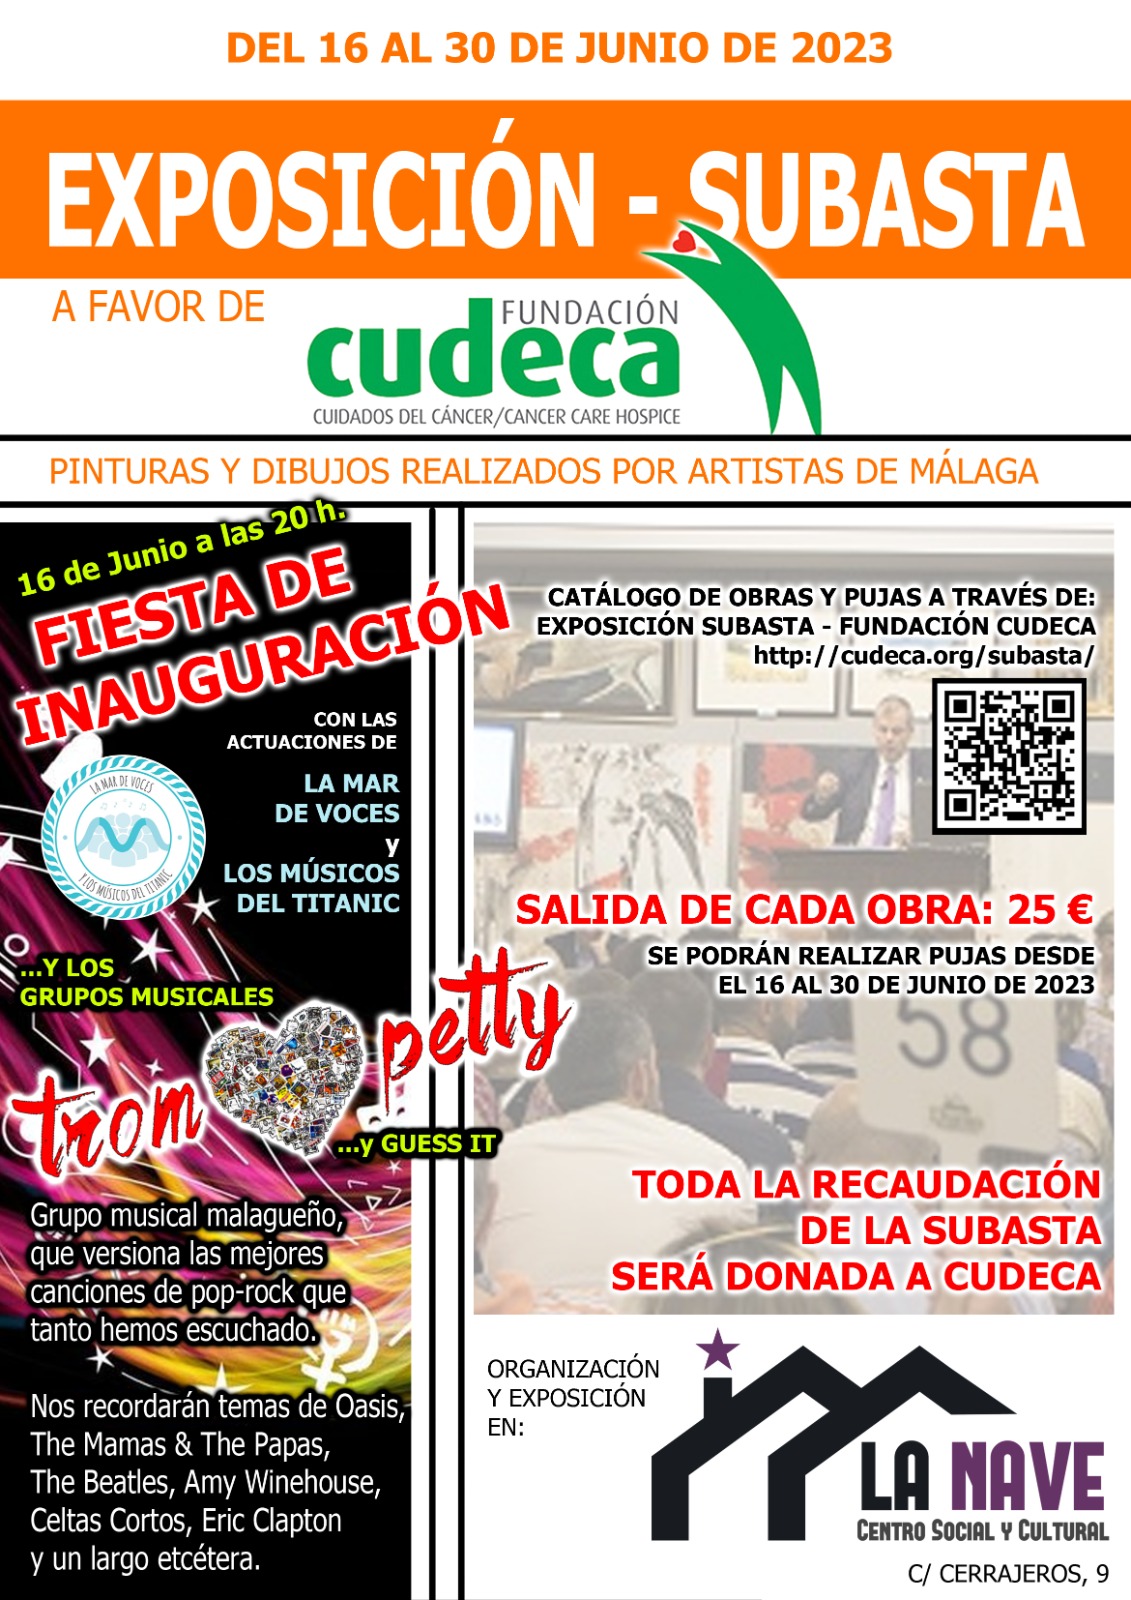 Expo Auction La Nave in aid of Cudeca